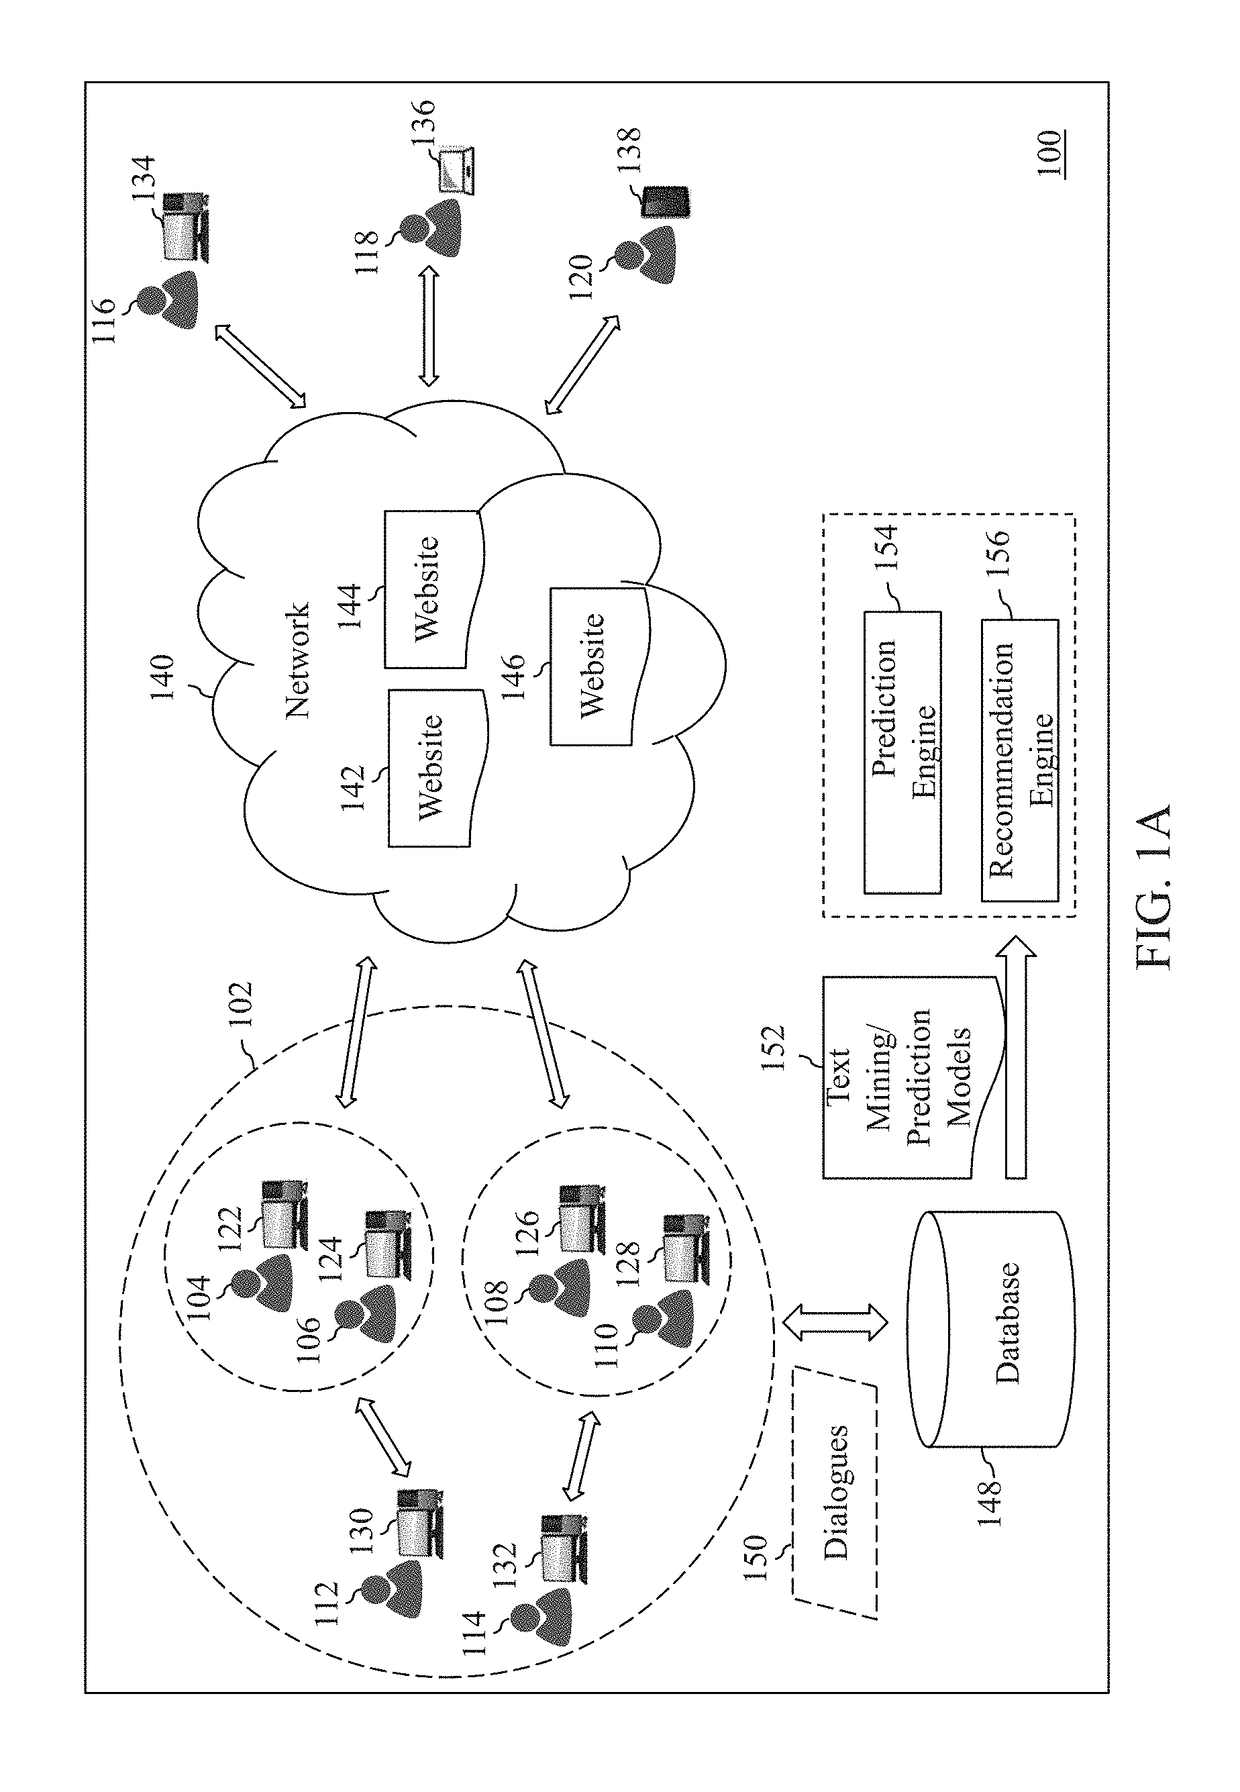 Systems and methods for facilitating dialogue mining